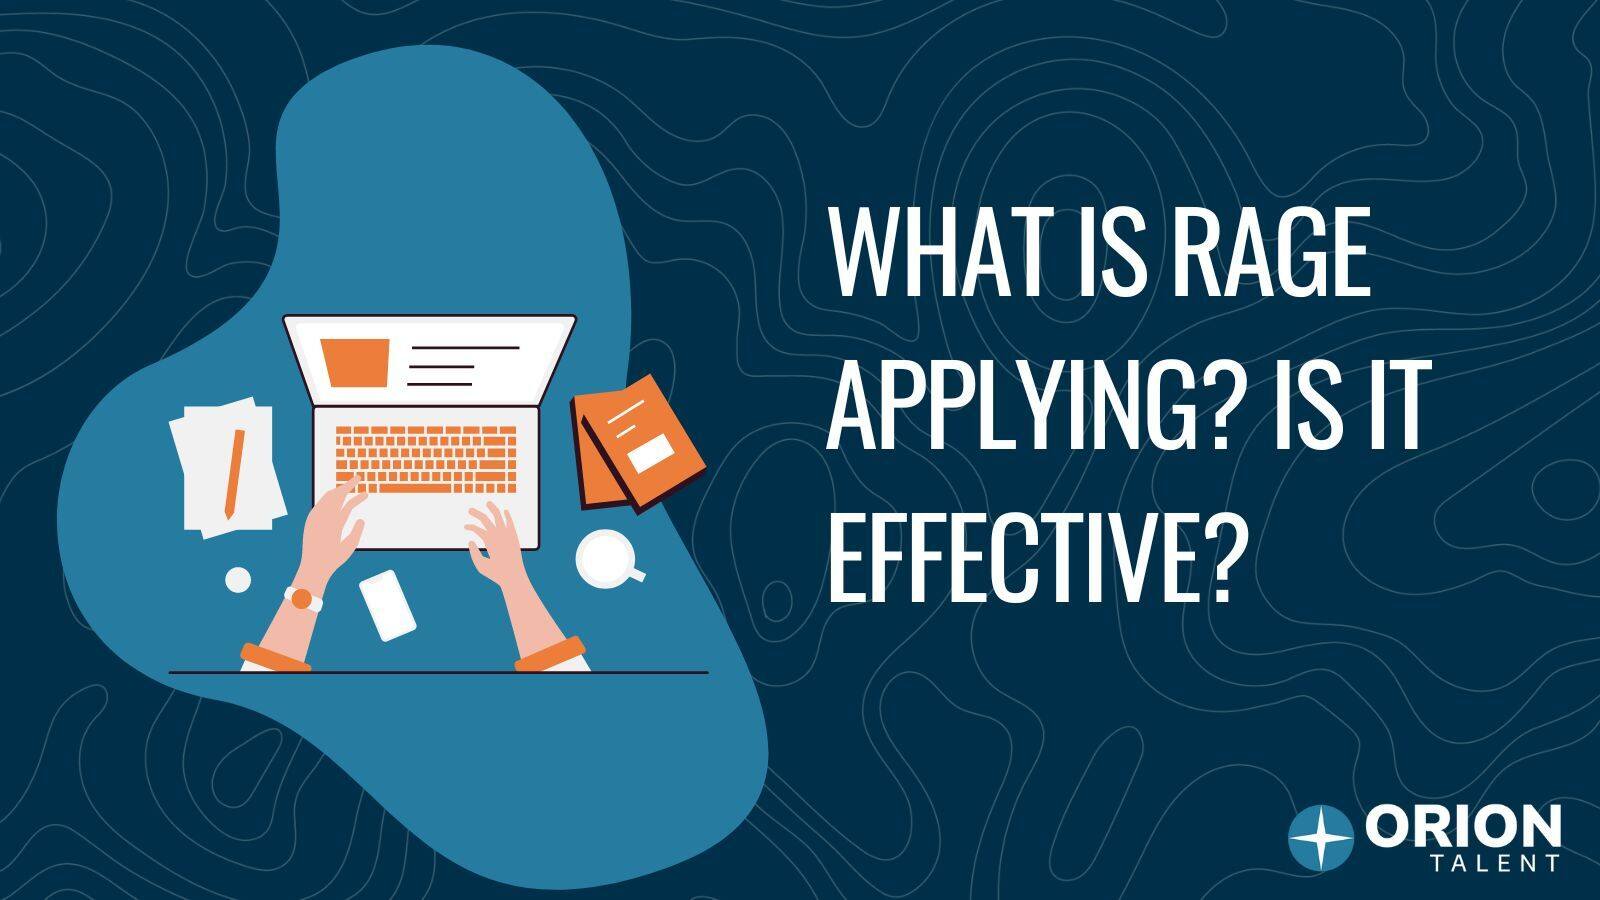 Rage Applying: What Is It and Does It Really Work?